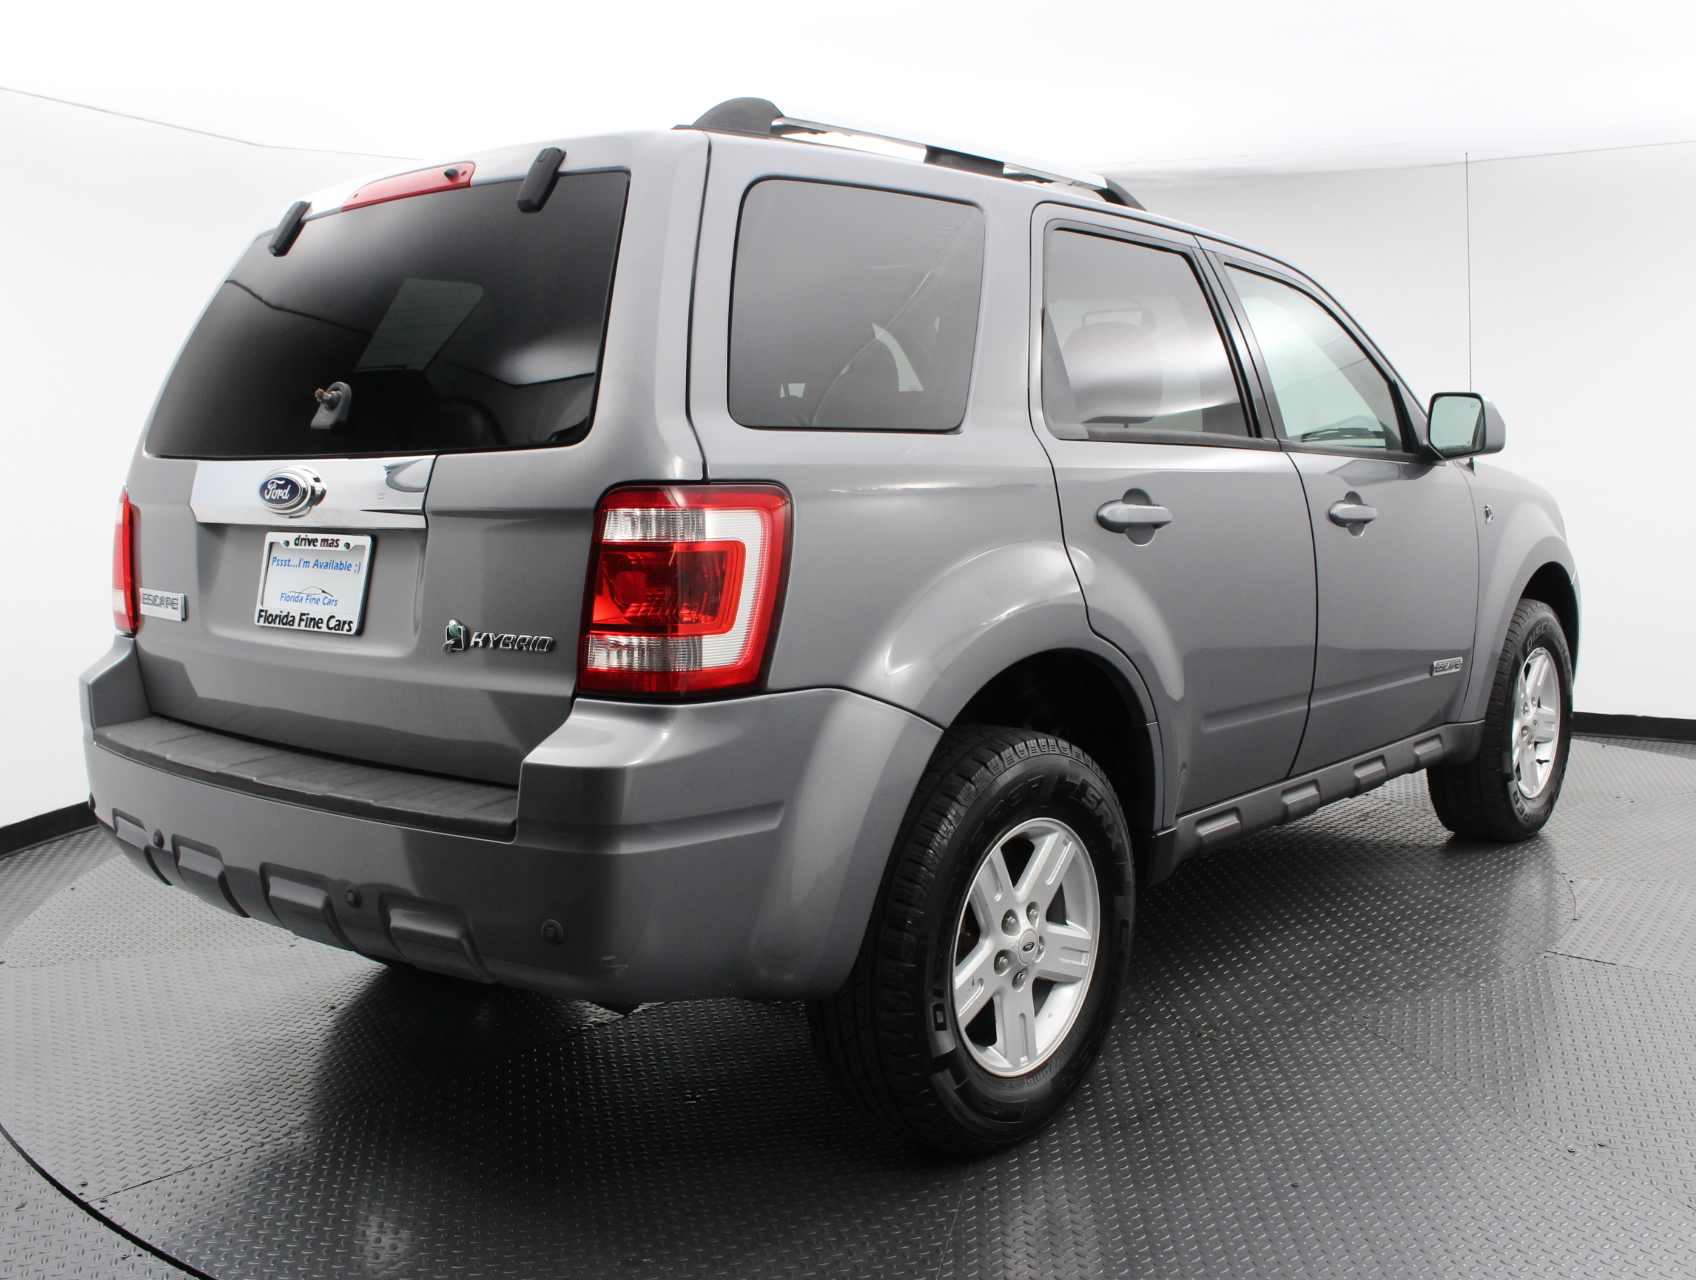 Florida Fine Cars - Used FORD ESCAPE 2008 WEST PALM SELECT TRIM